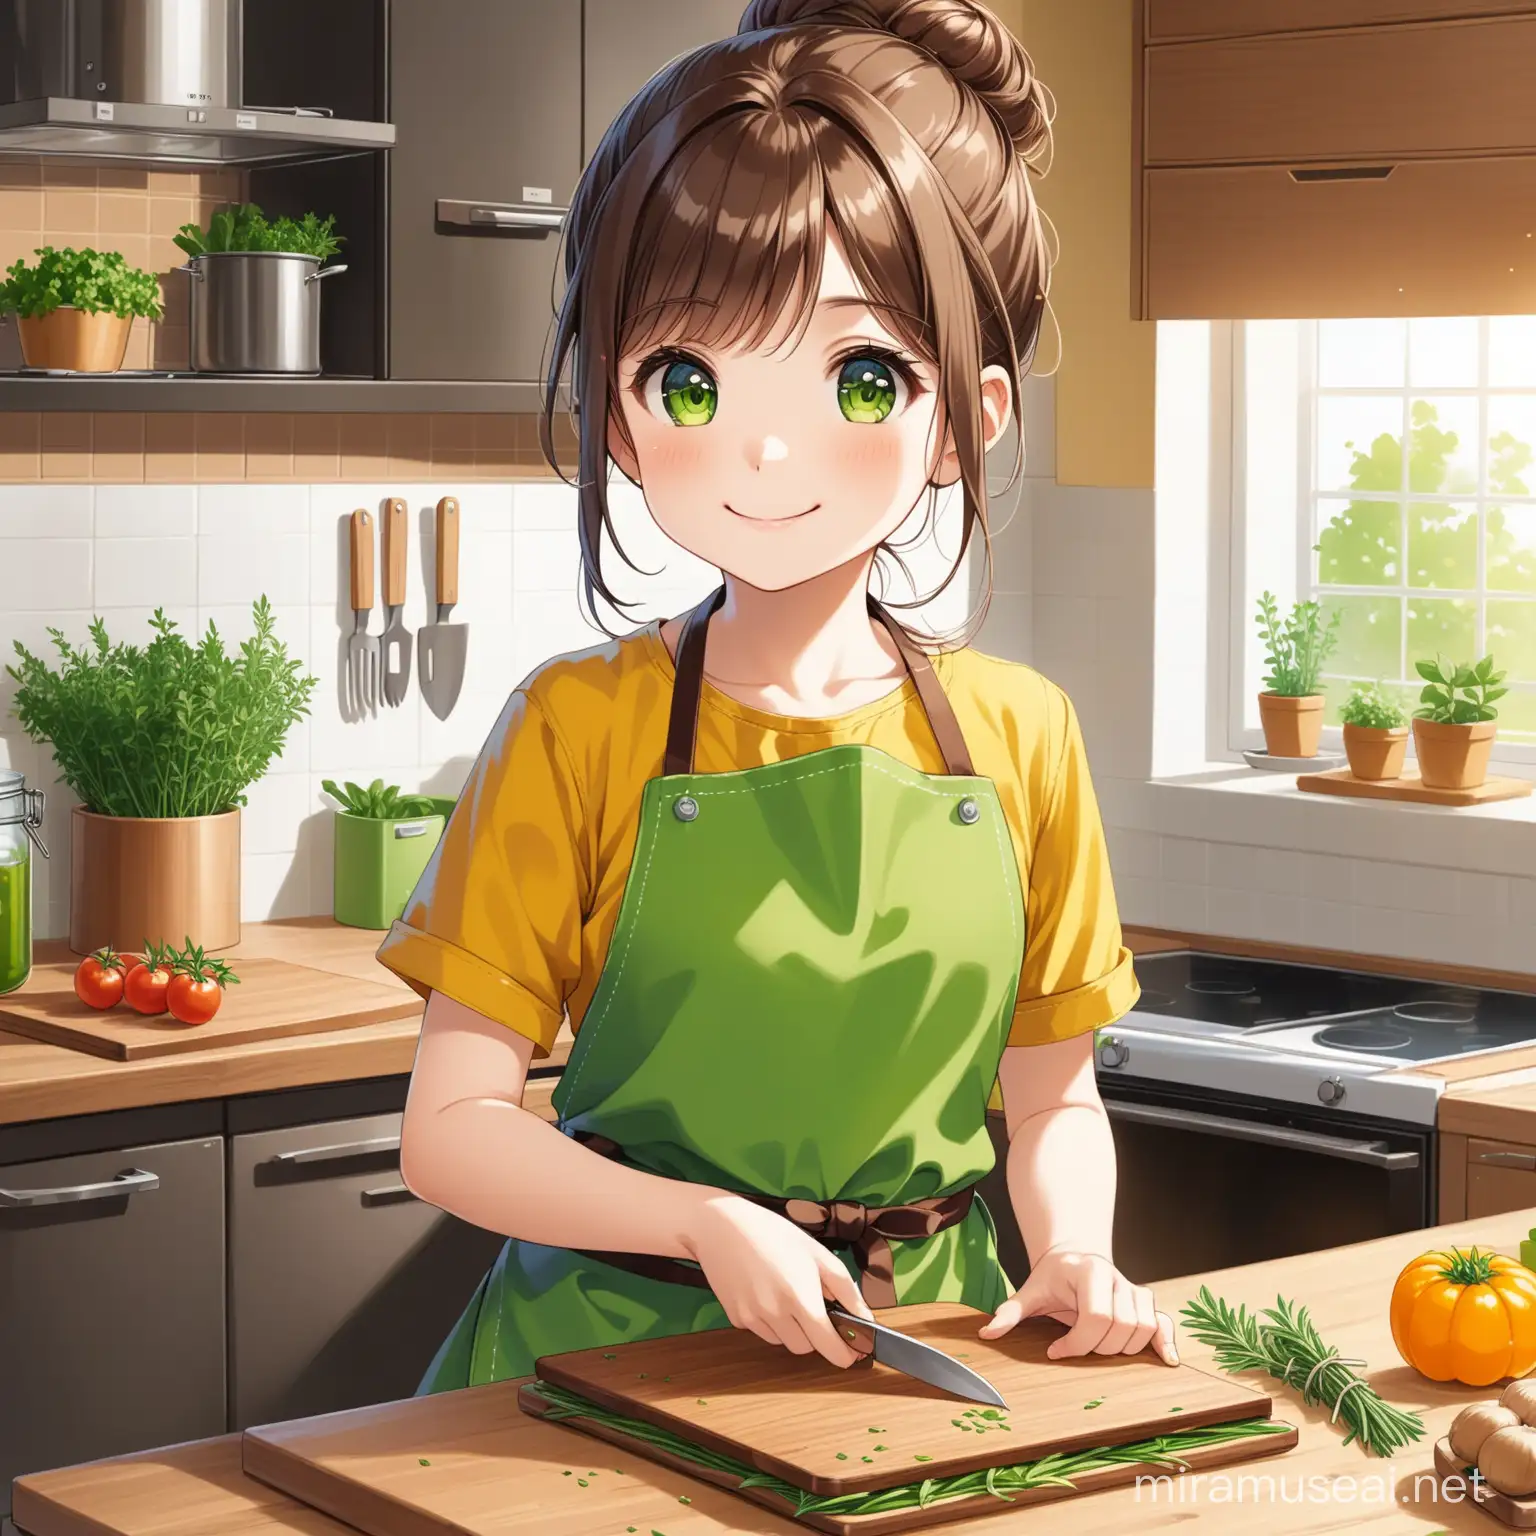 11 year old girl, brown hair in a messy bun with bangs, yellow apron with pockets and in the pockets are green herbs, holding a leather brown cookbook and green herbs, green eyes, in a cute vegetarian kitchen, smiling, chopping boards on a bench, an oven, a cute fridge,  